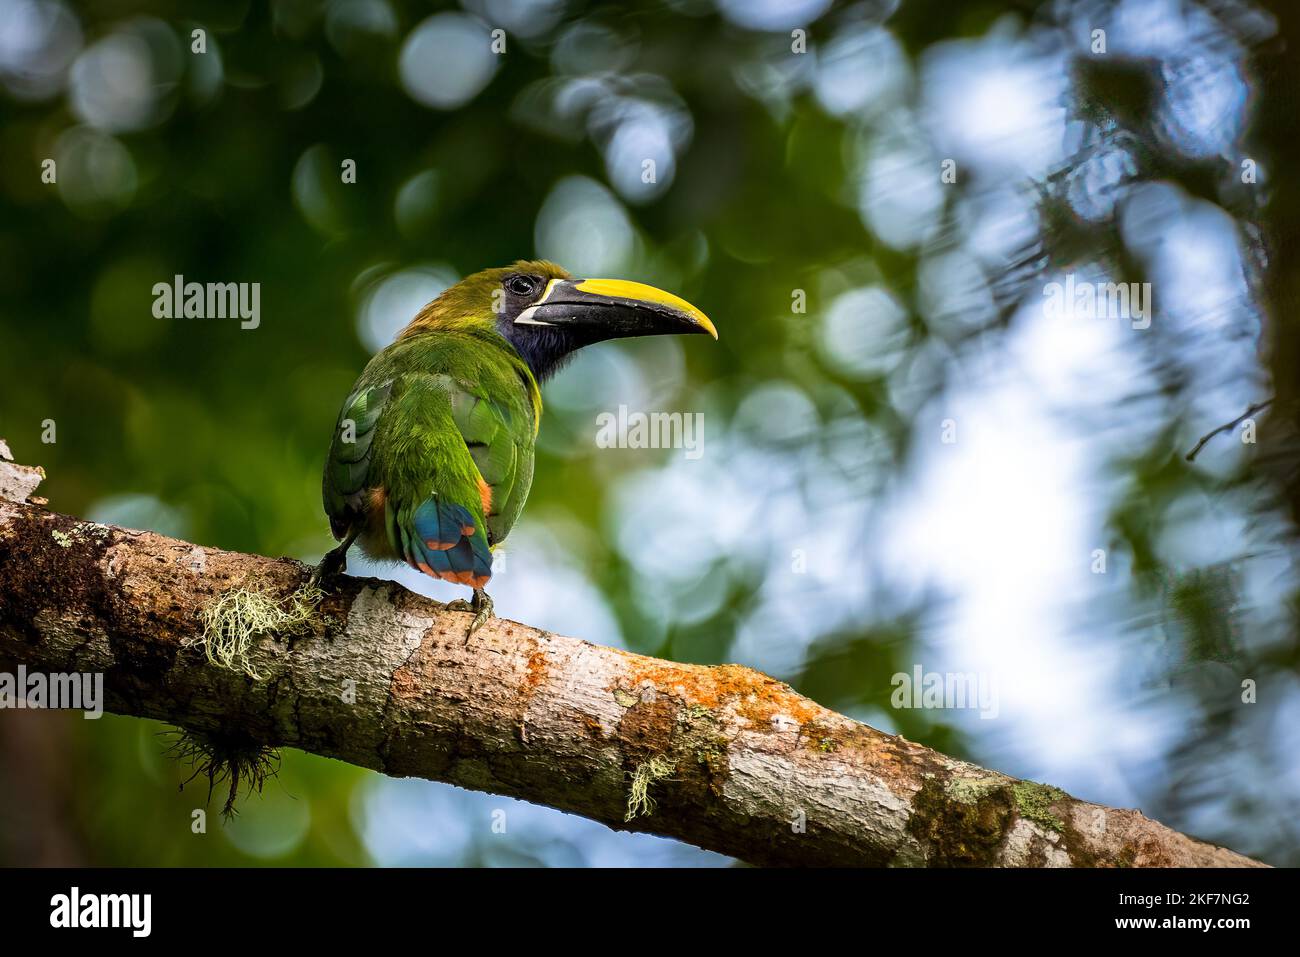 Northern Emerald-Toucanet or Blue-throated toucanet perched image taken in Panama Stock Photo